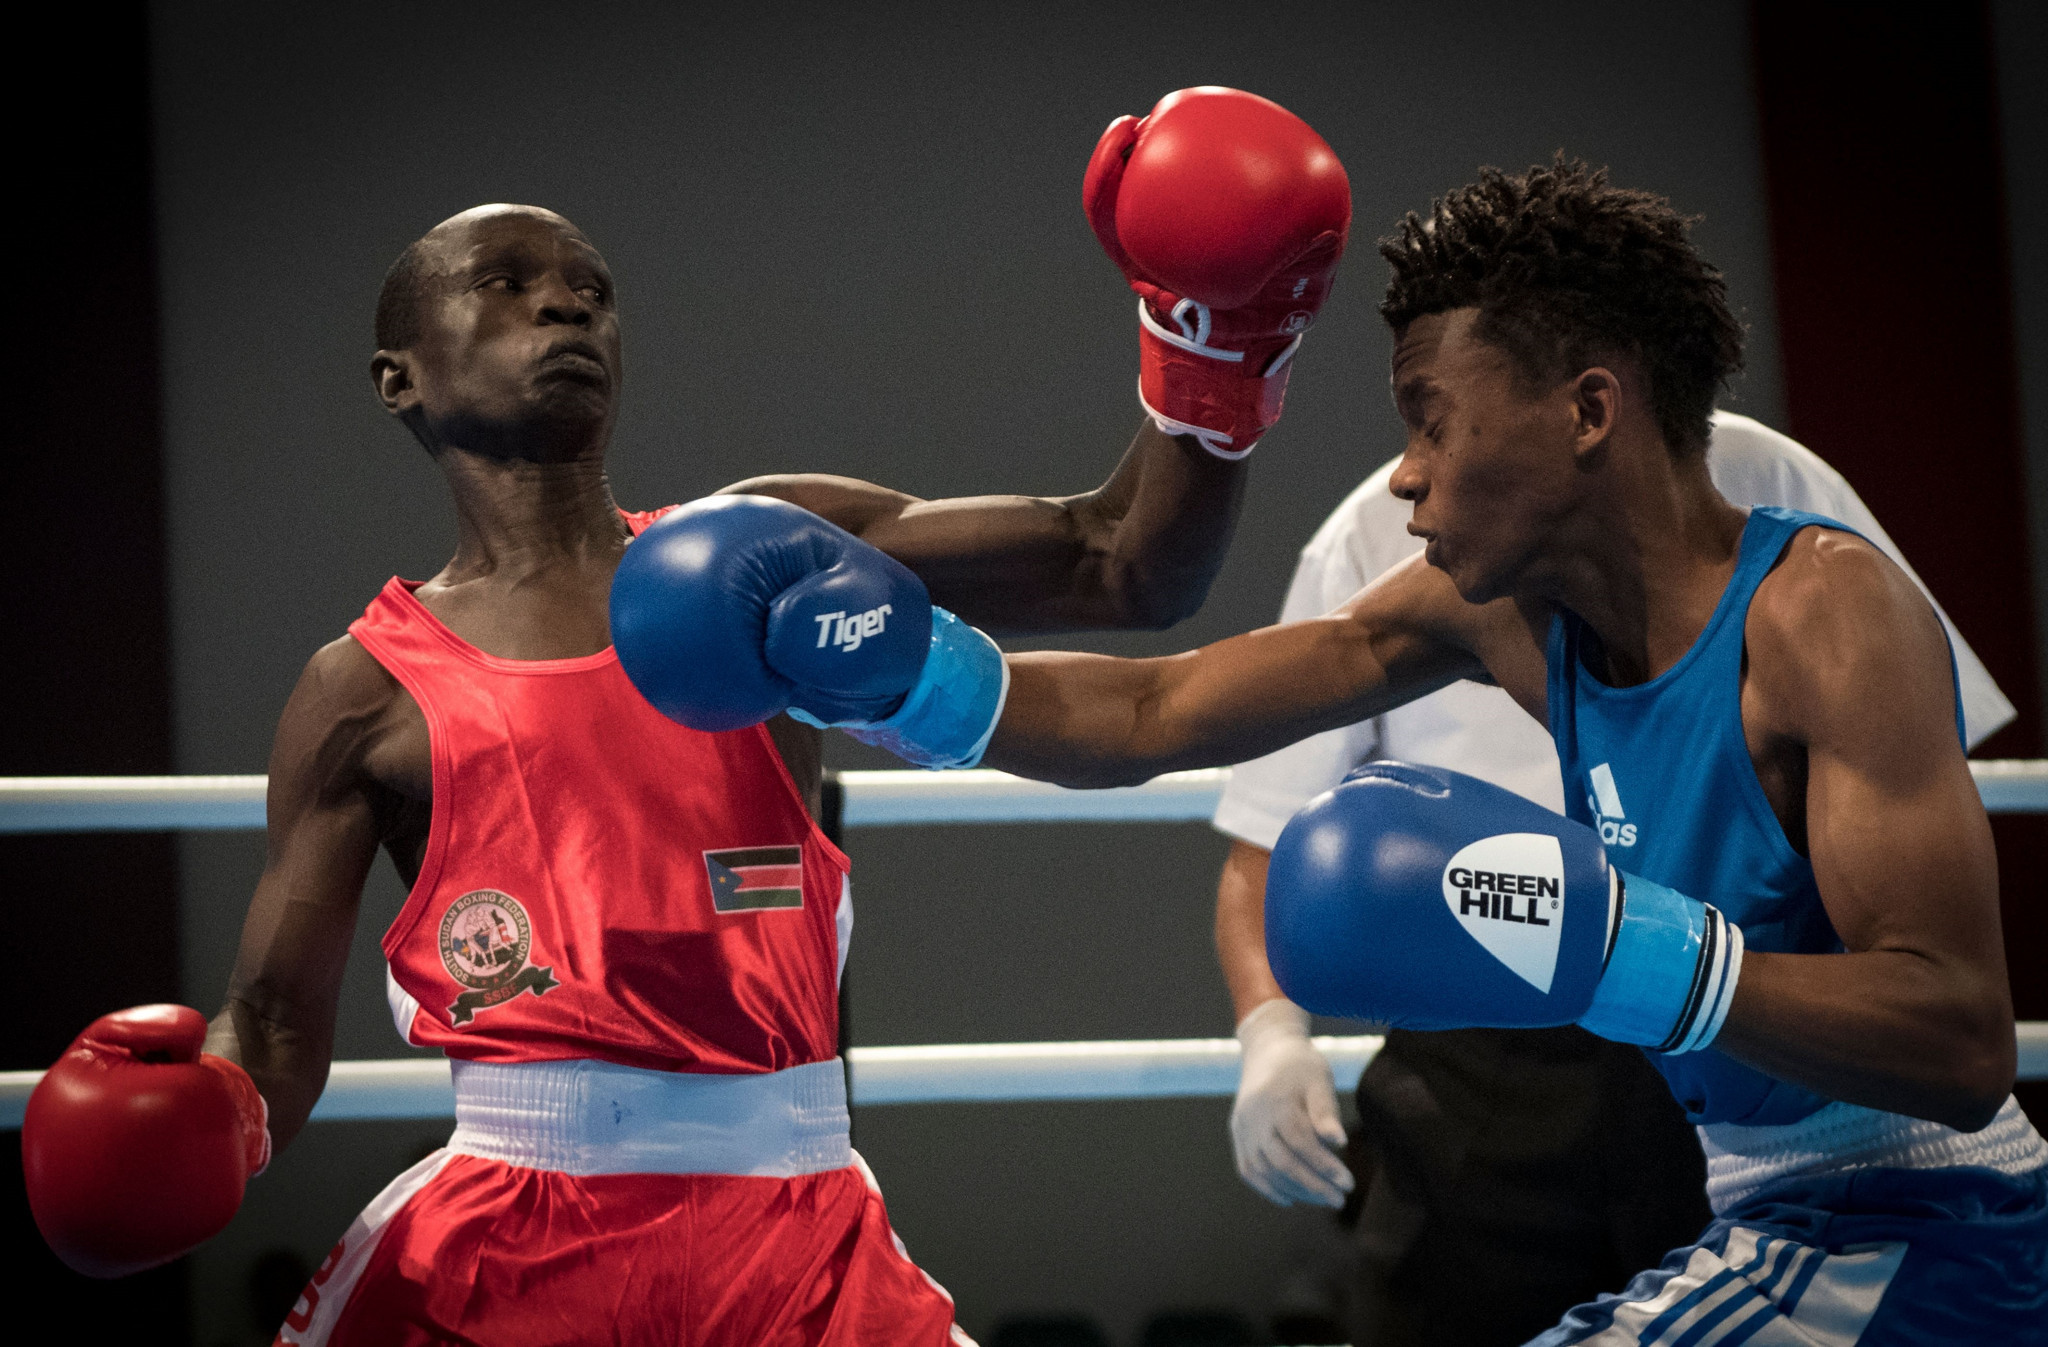 South Sudan appeal for funds to send boxing teams to African Games